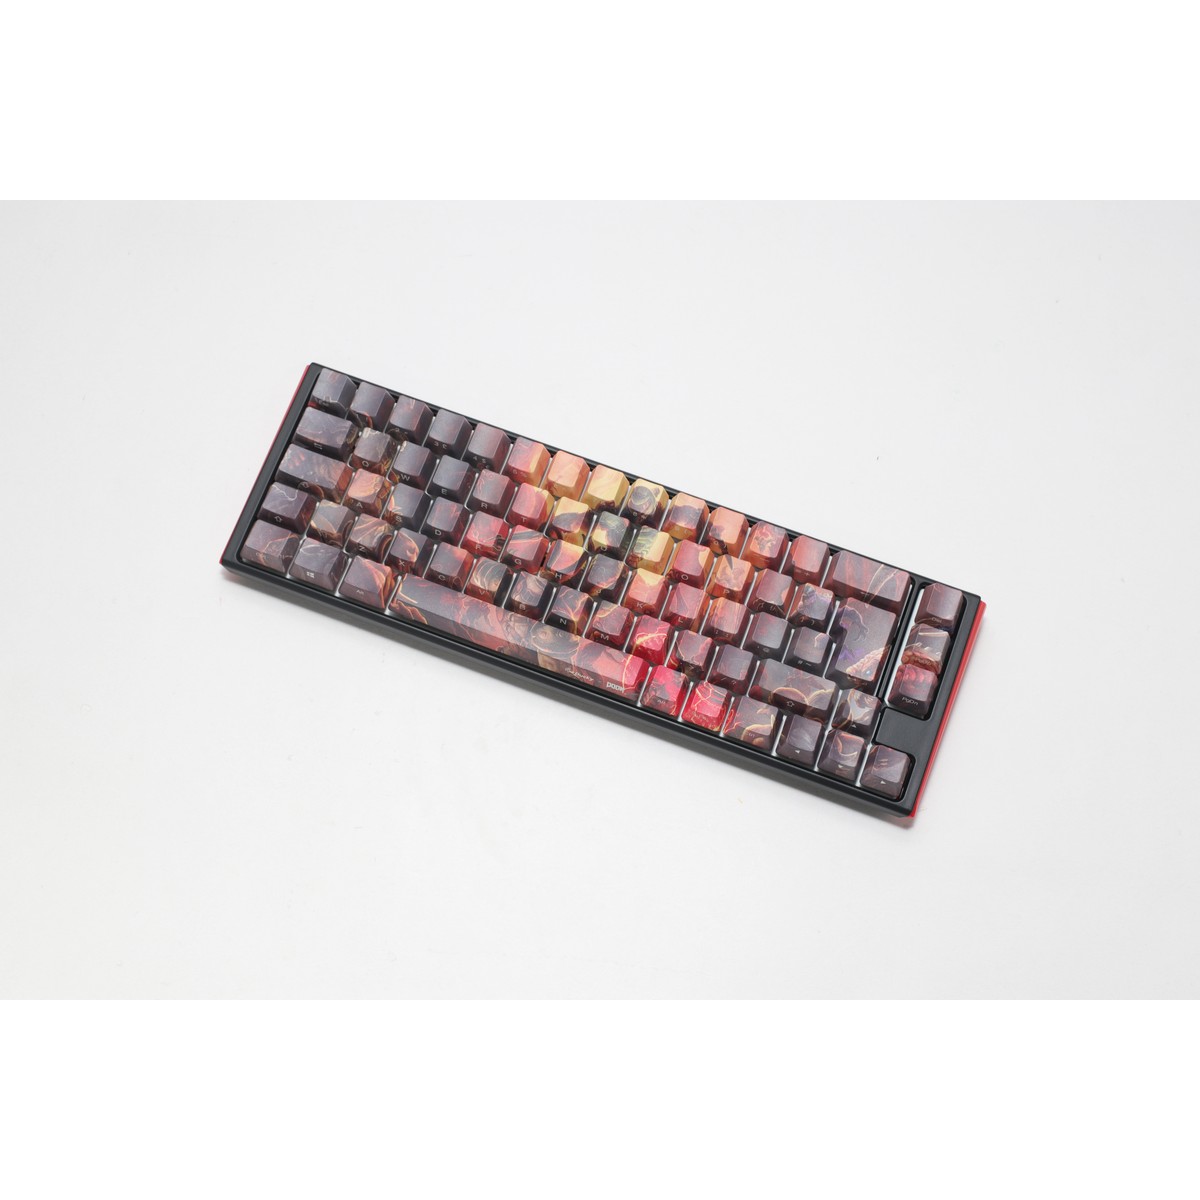 Ducky - Ducky x DOOM SF 65% Gaming Keyboard Limited Edition Cherry MX Red Switches UK La